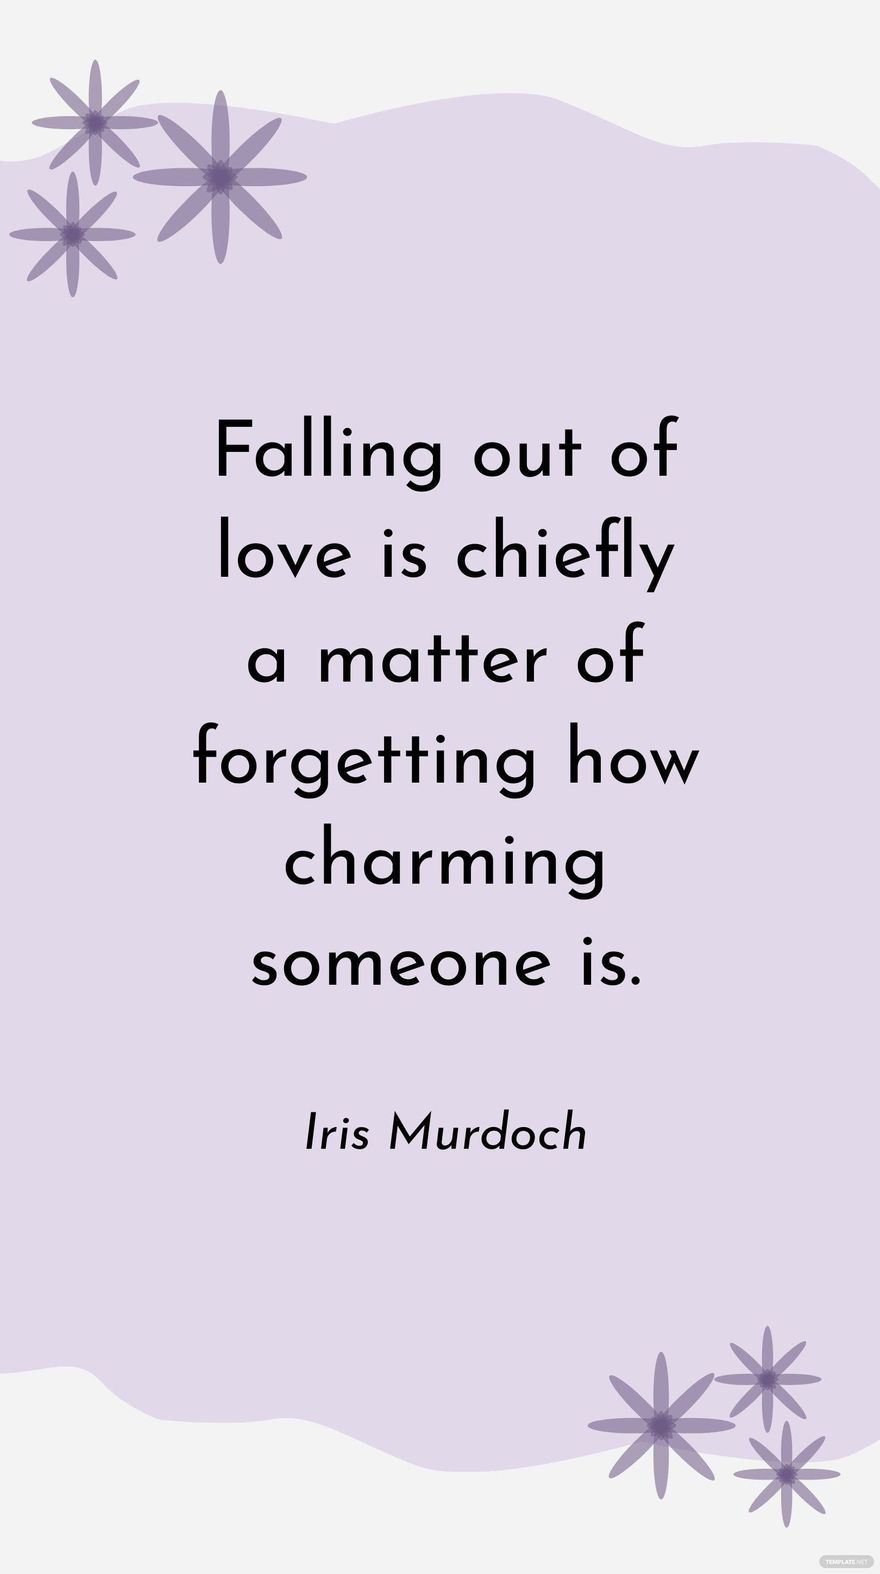 Free Iris Murdoch - Falling out of love is chiefly a matter of forgetting how charming someone is. in JPG